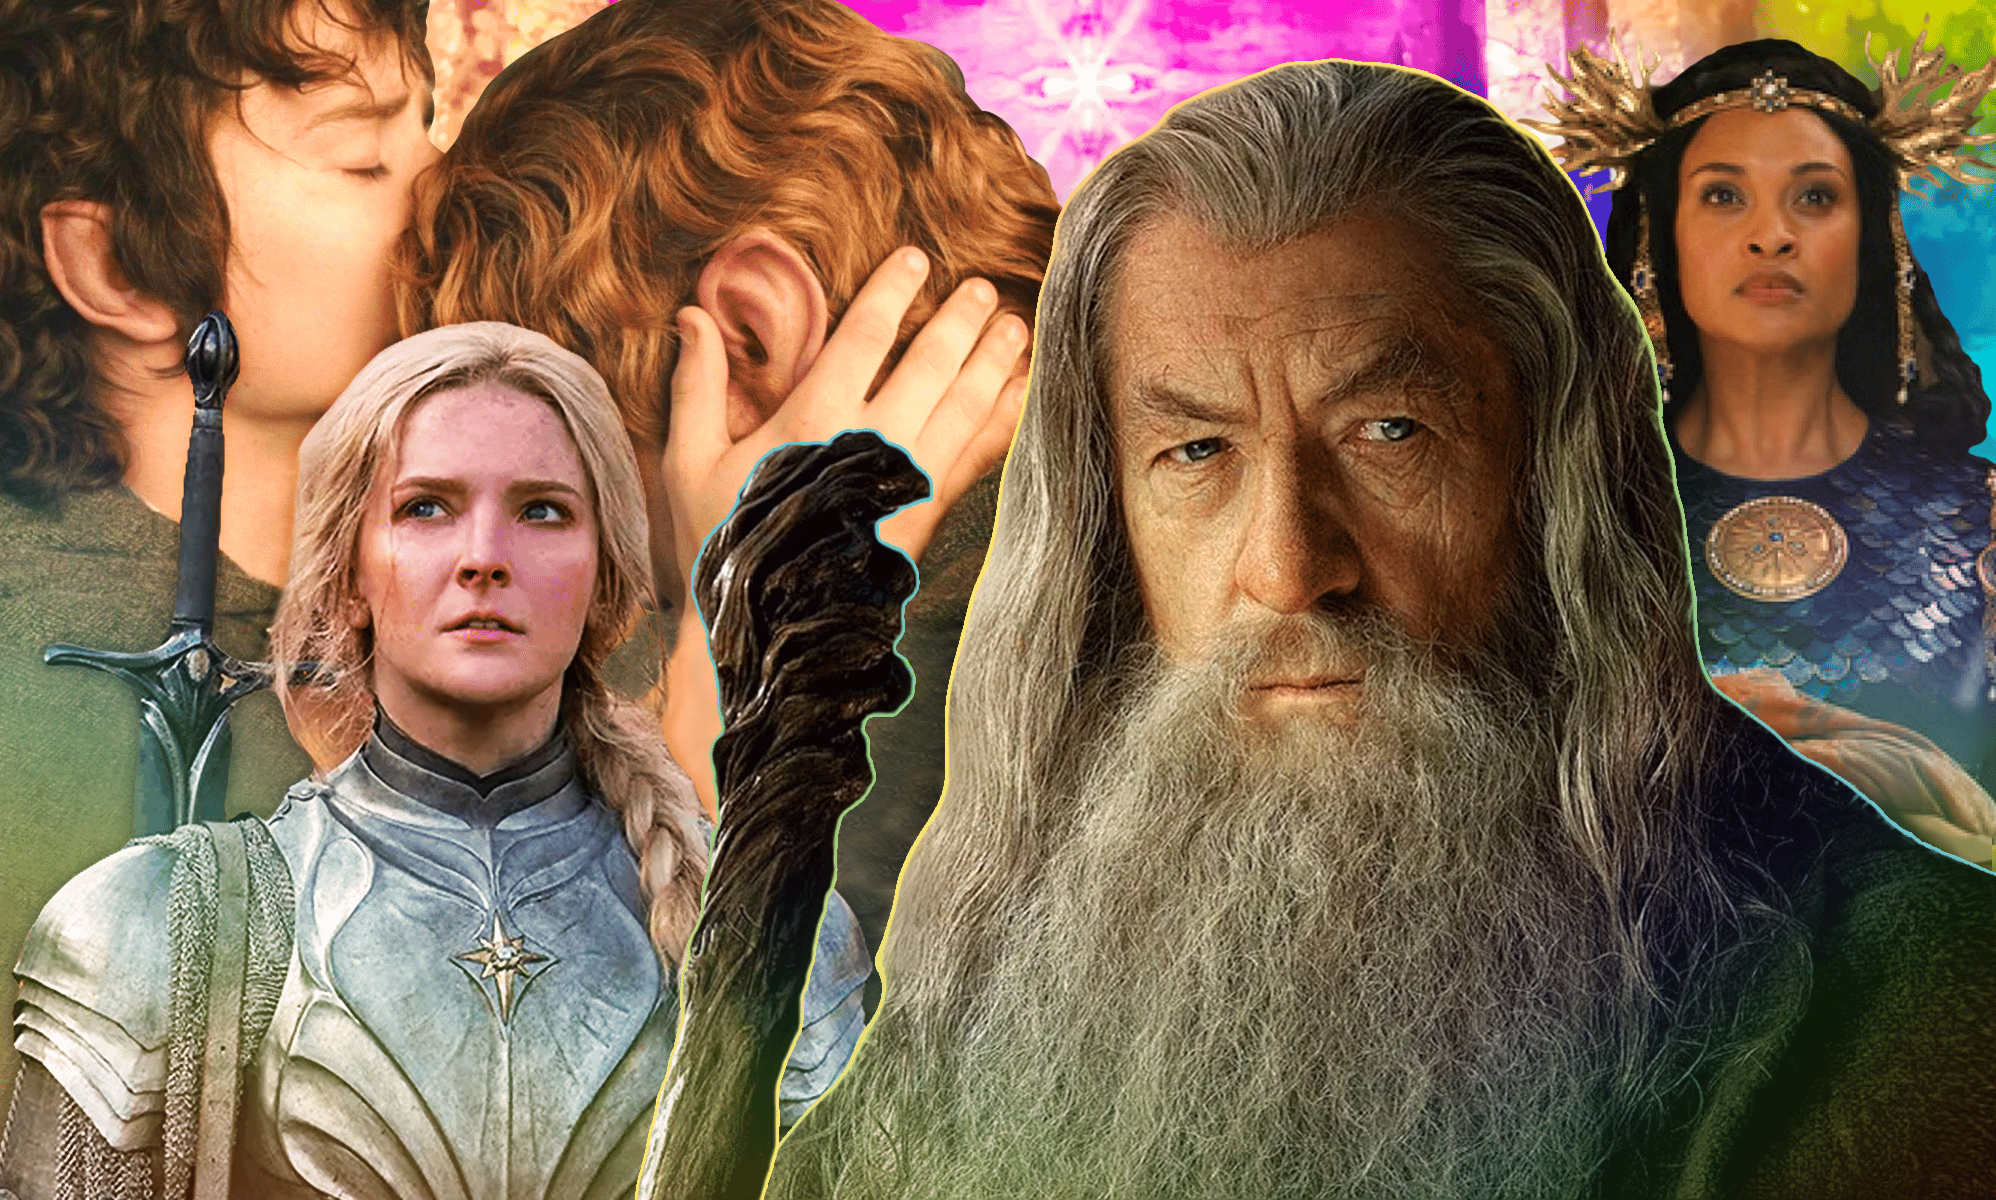 Between The Hobbit and The Lord of the Rings Why Did Saruman Turn Evil?